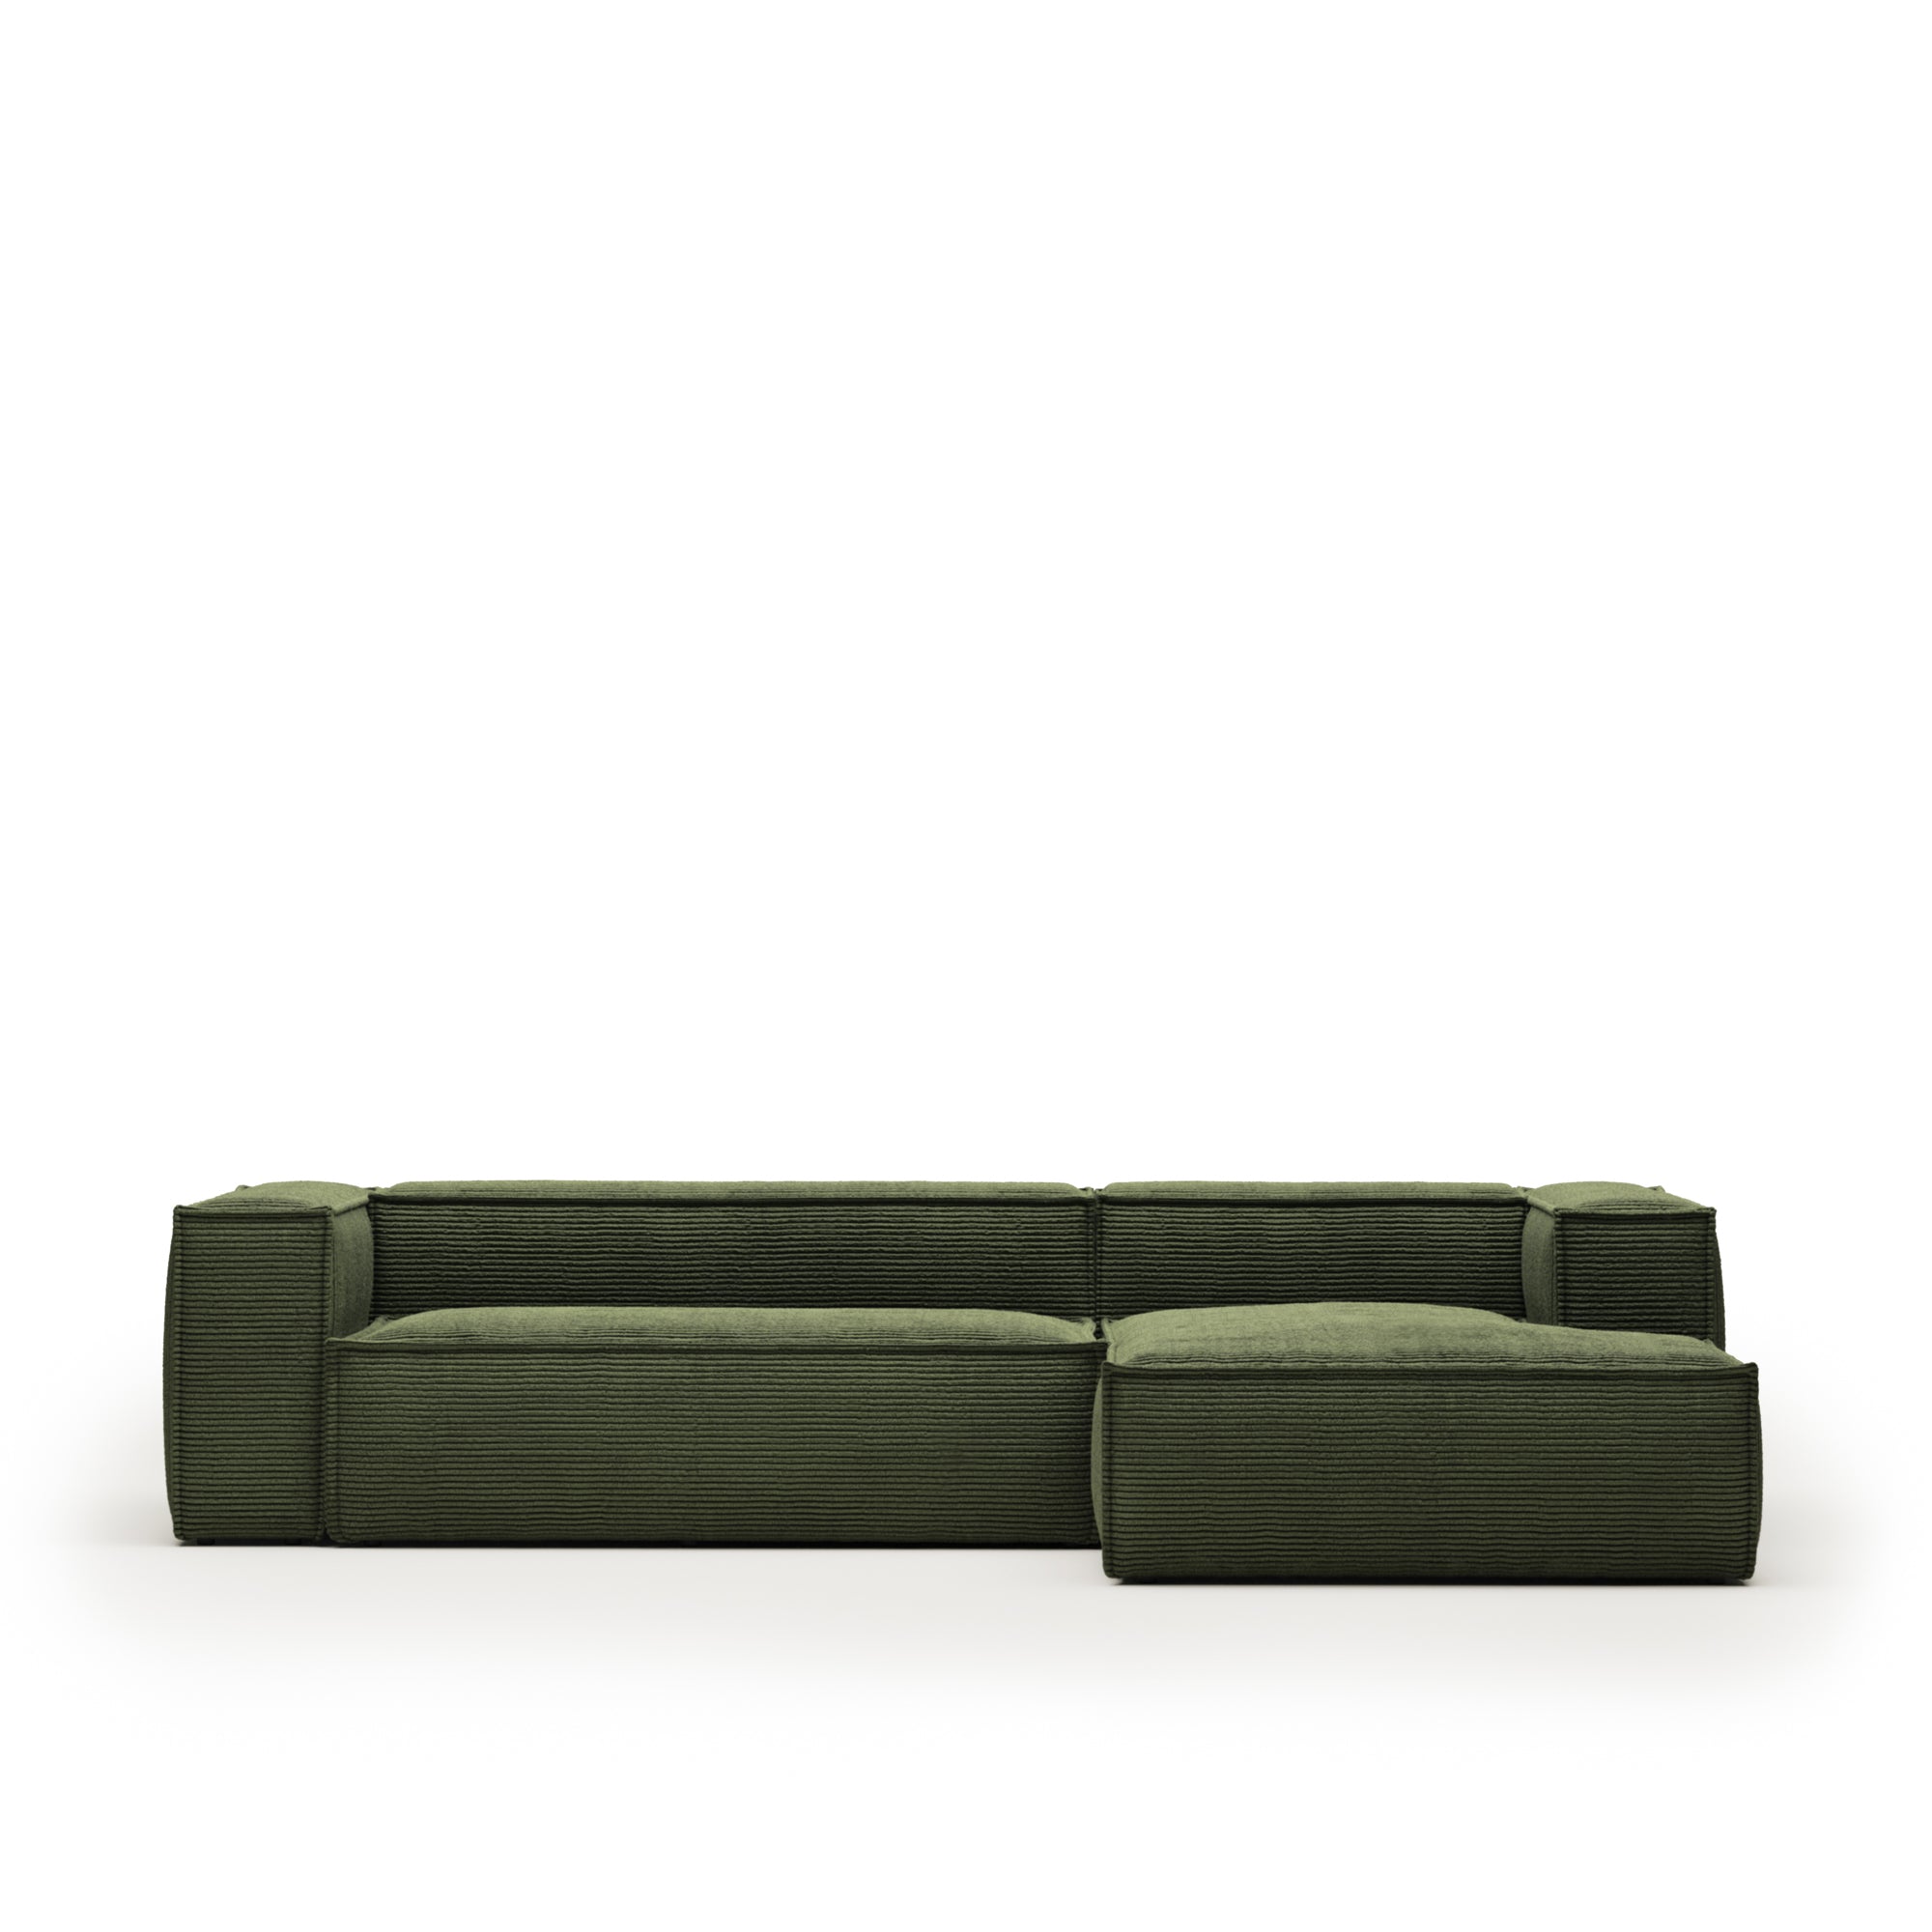 Blok 3 seater sofa with right side chaise longue in green wide seam corduroy, 300 cm